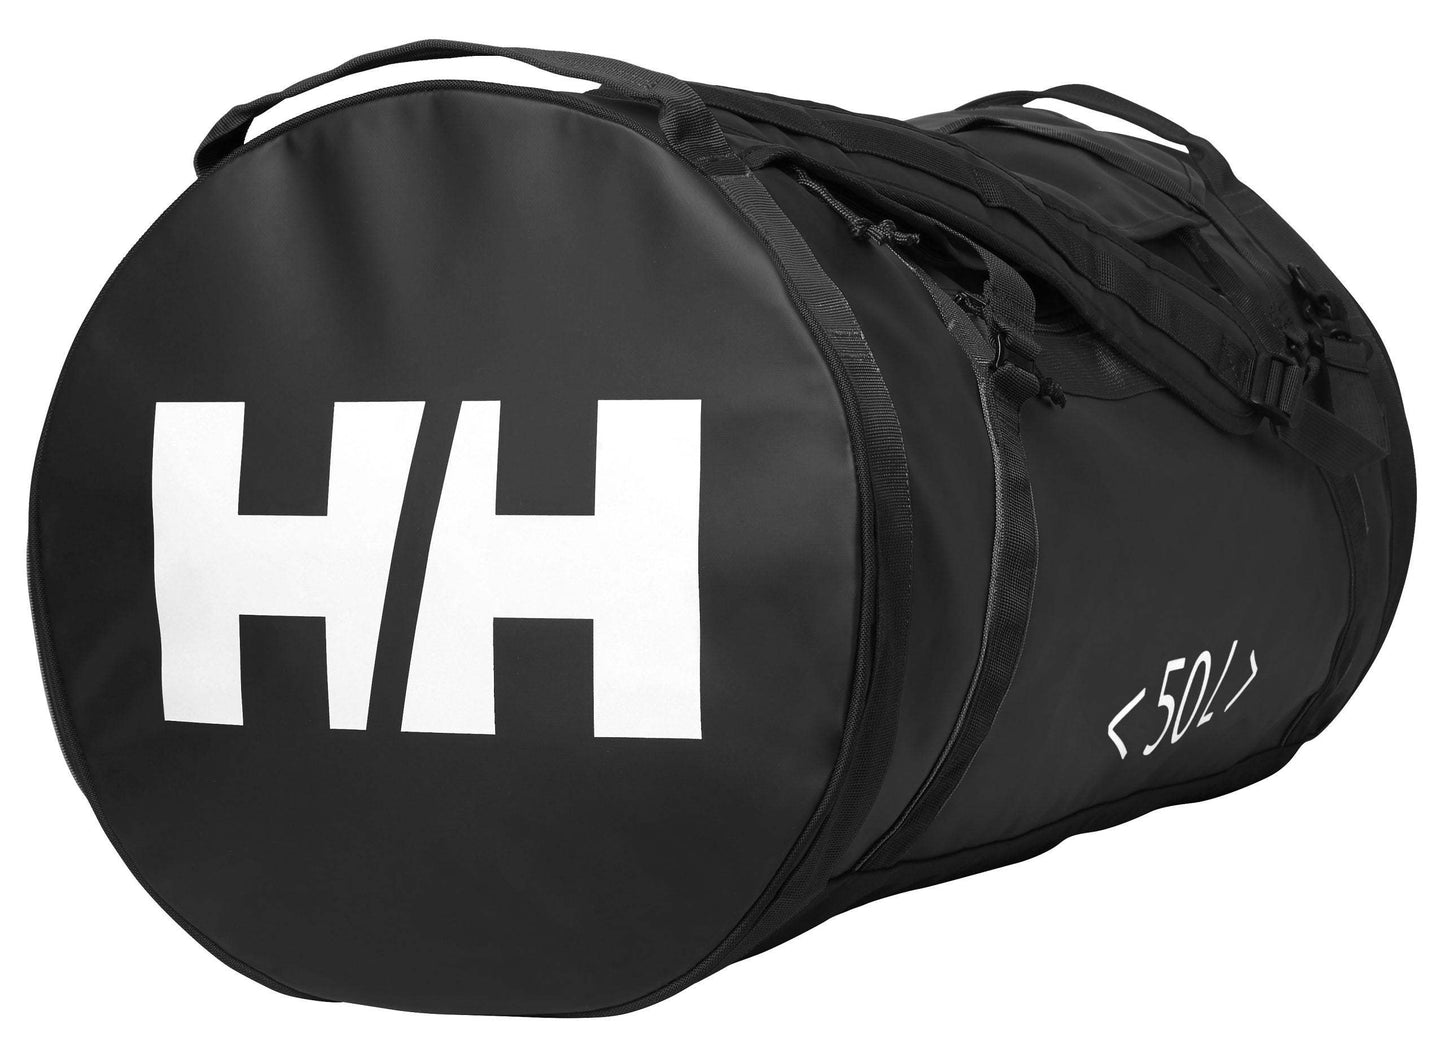 Helly Hansen Duffel Bag 2.0 50L - The Luxury Promotional Gifts Company Limited